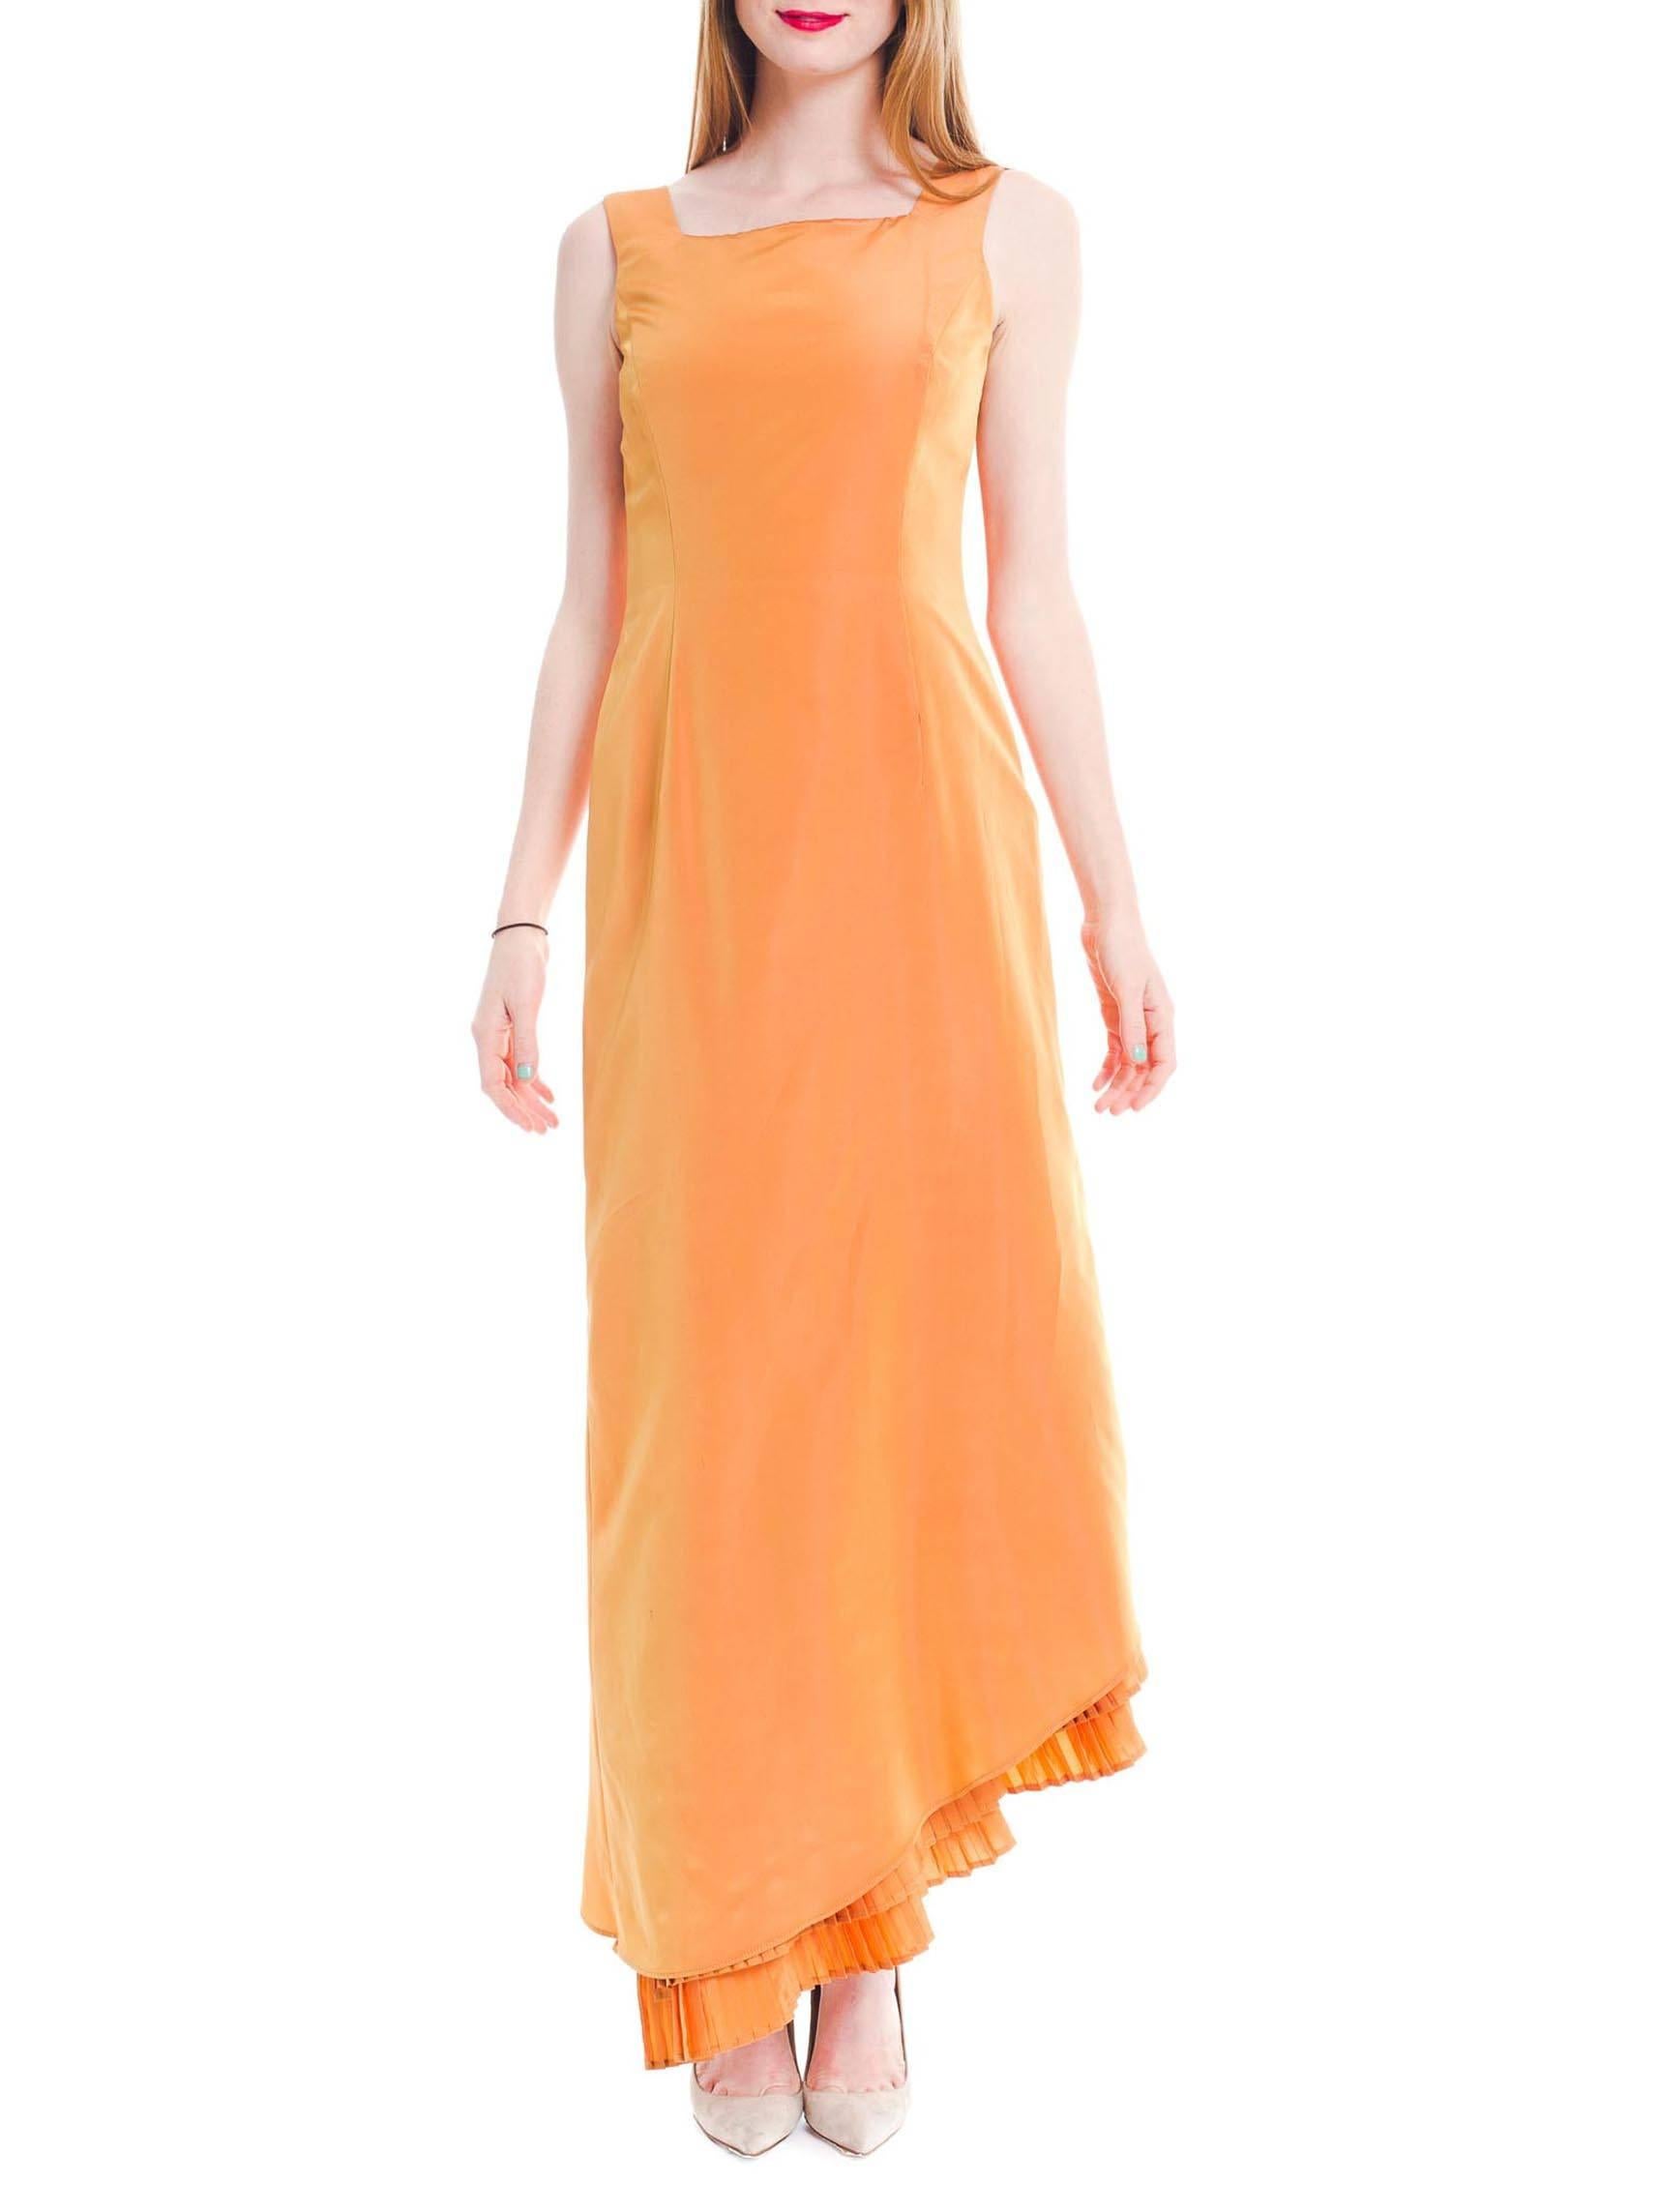 This is a stunning peachy-orange taffeta gown from Gianfranco Ferre's Studio collection. From the front, the elegant slim A-line cut looks deceptively simple. The square neckline is complemented by the rows of perfect knife-pleats which peek out